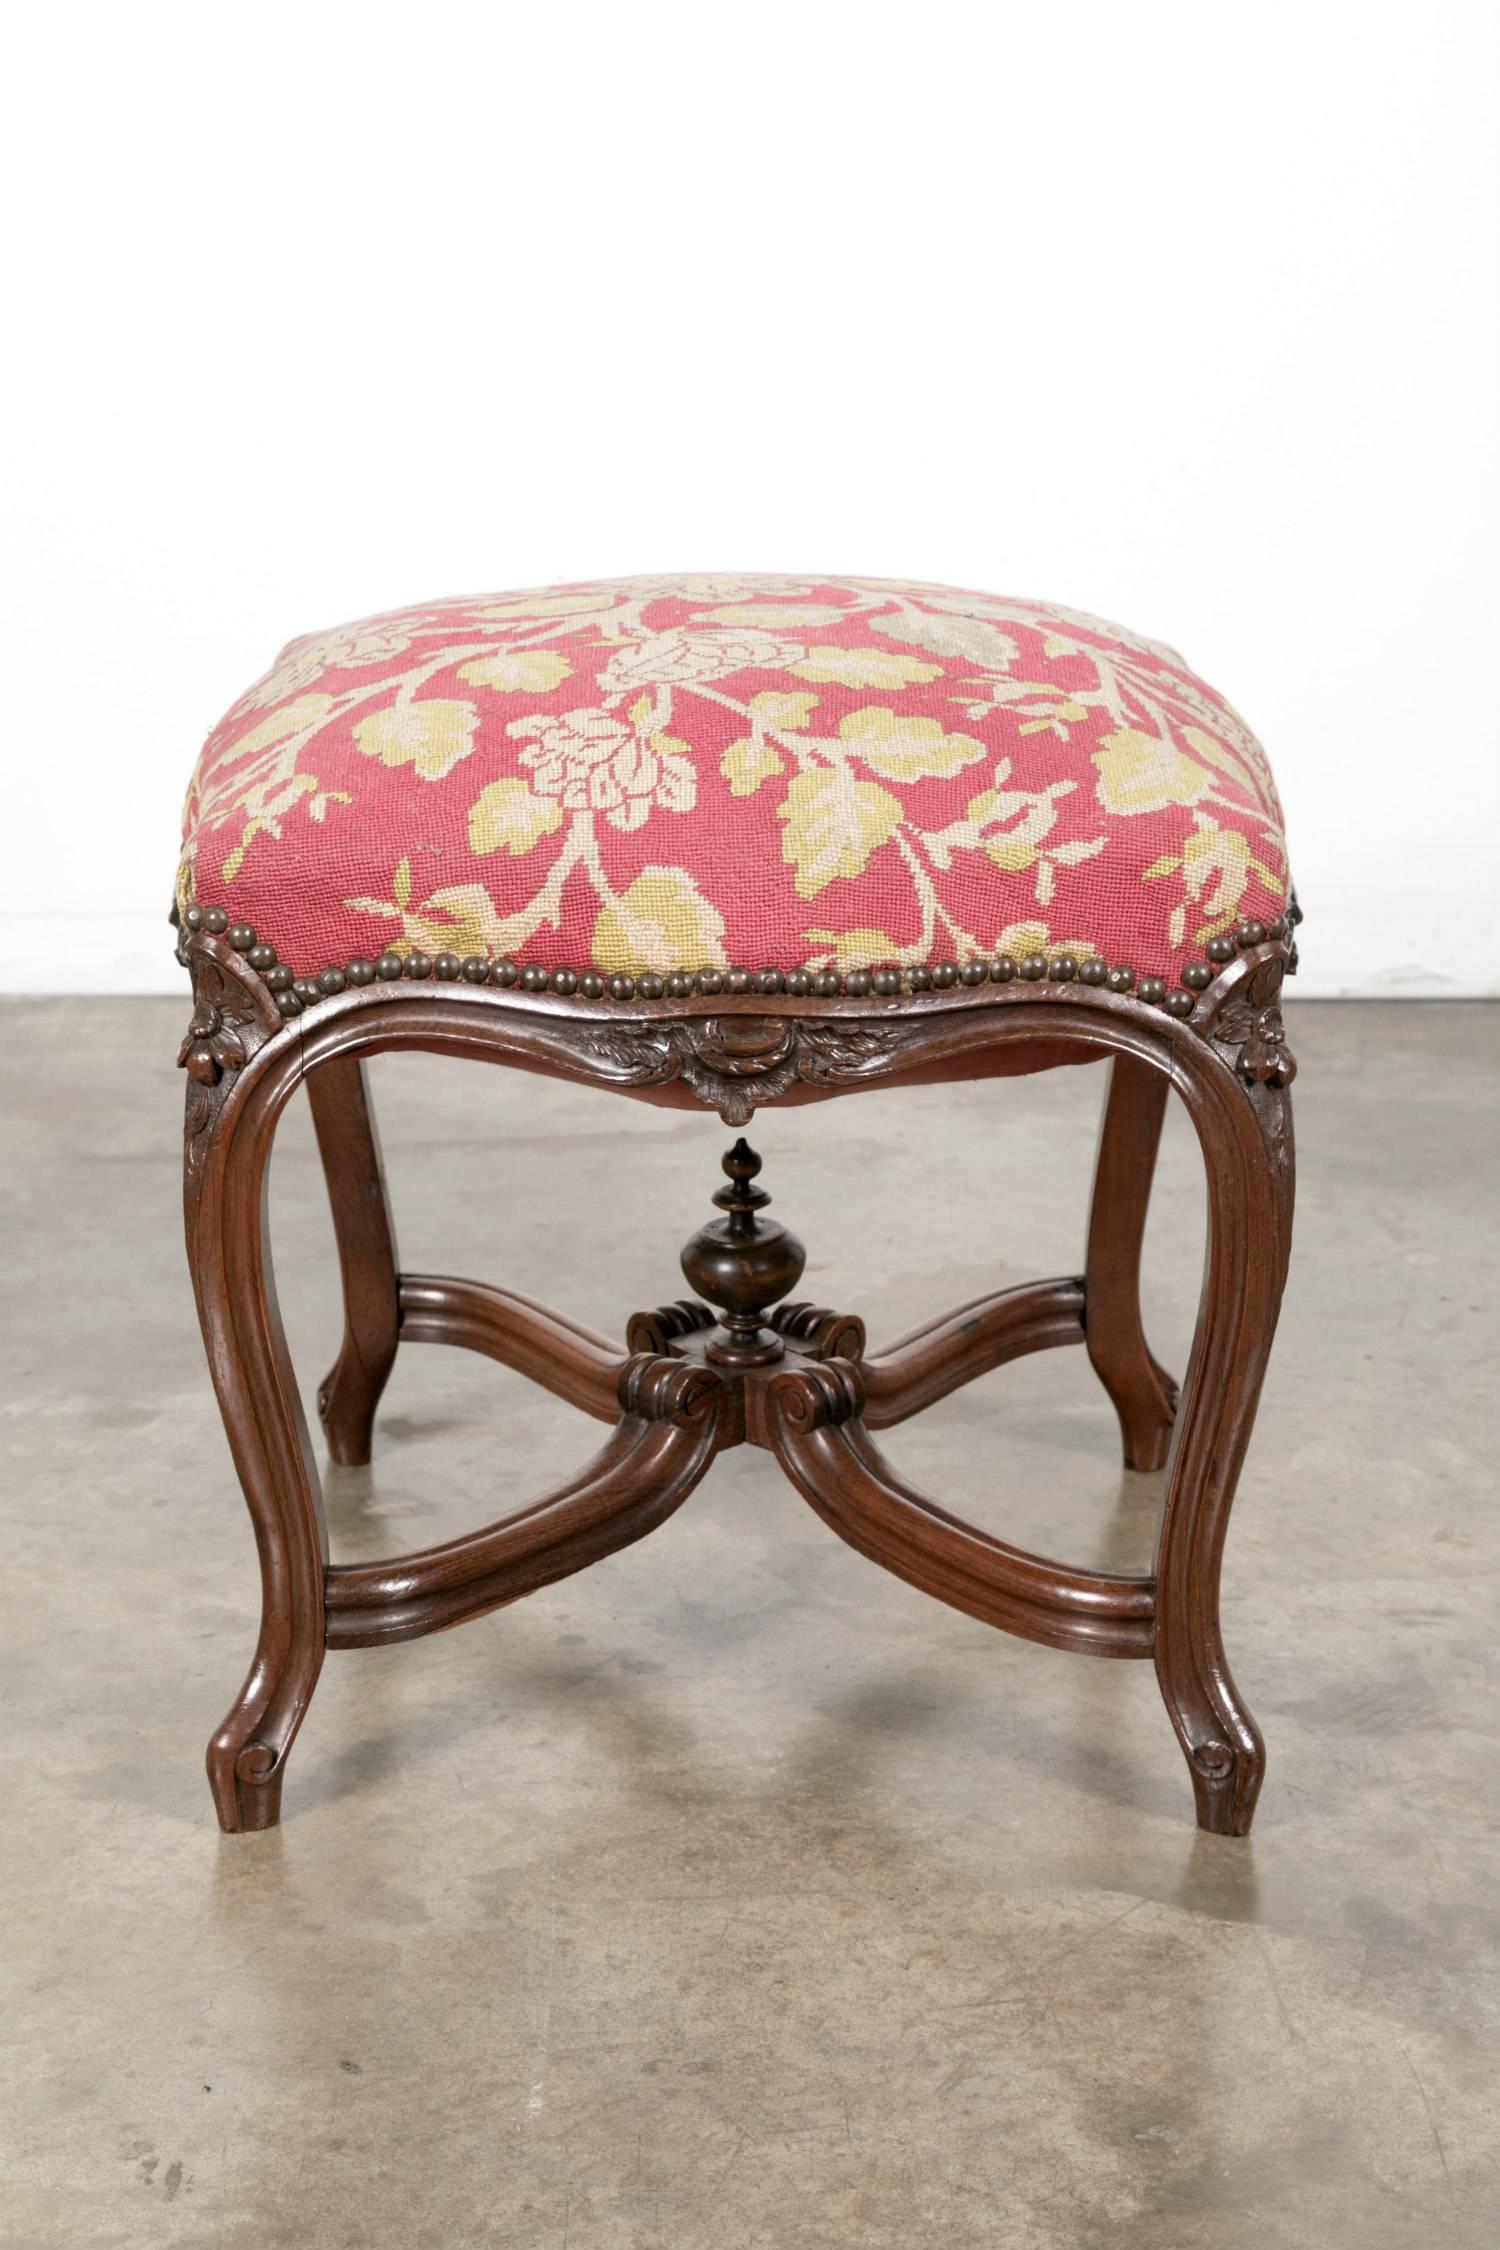 Add beautiful color to your living space with this ornately carved rosewood Louis XV style French court tabouret with finial mounted cross-stretchers from Lyon. Upholstered with the original handwoven floral needlepoint this footstool can be used to